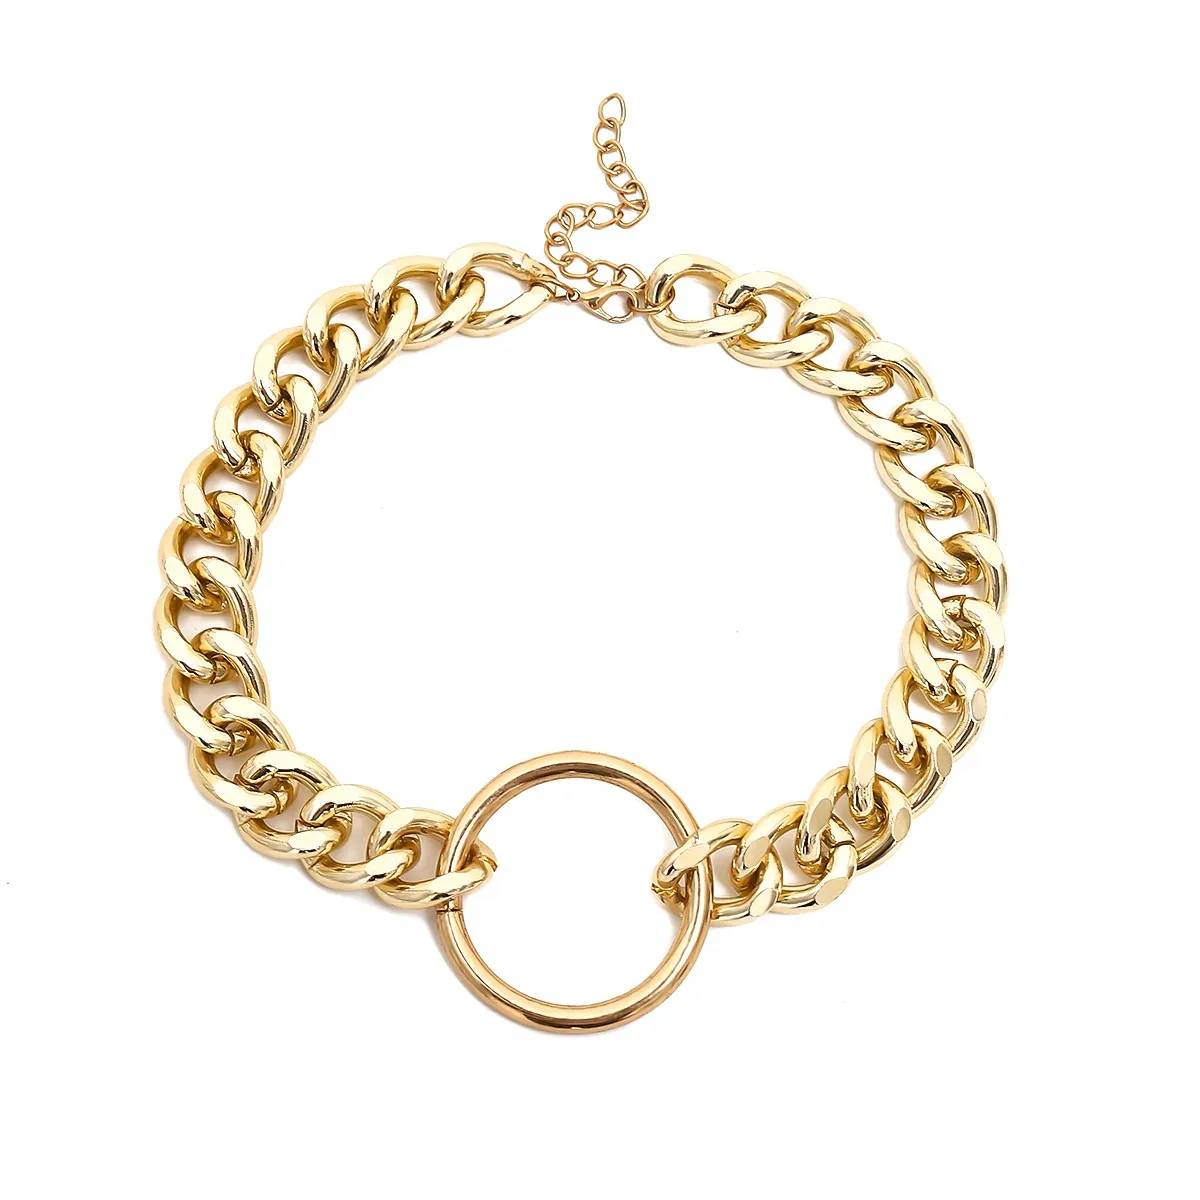 Fashion-Vintage Big Metal Circle chokers necklaces for women punk jewelry Gold link chain necklace circle pendant necklace chunky bijoux